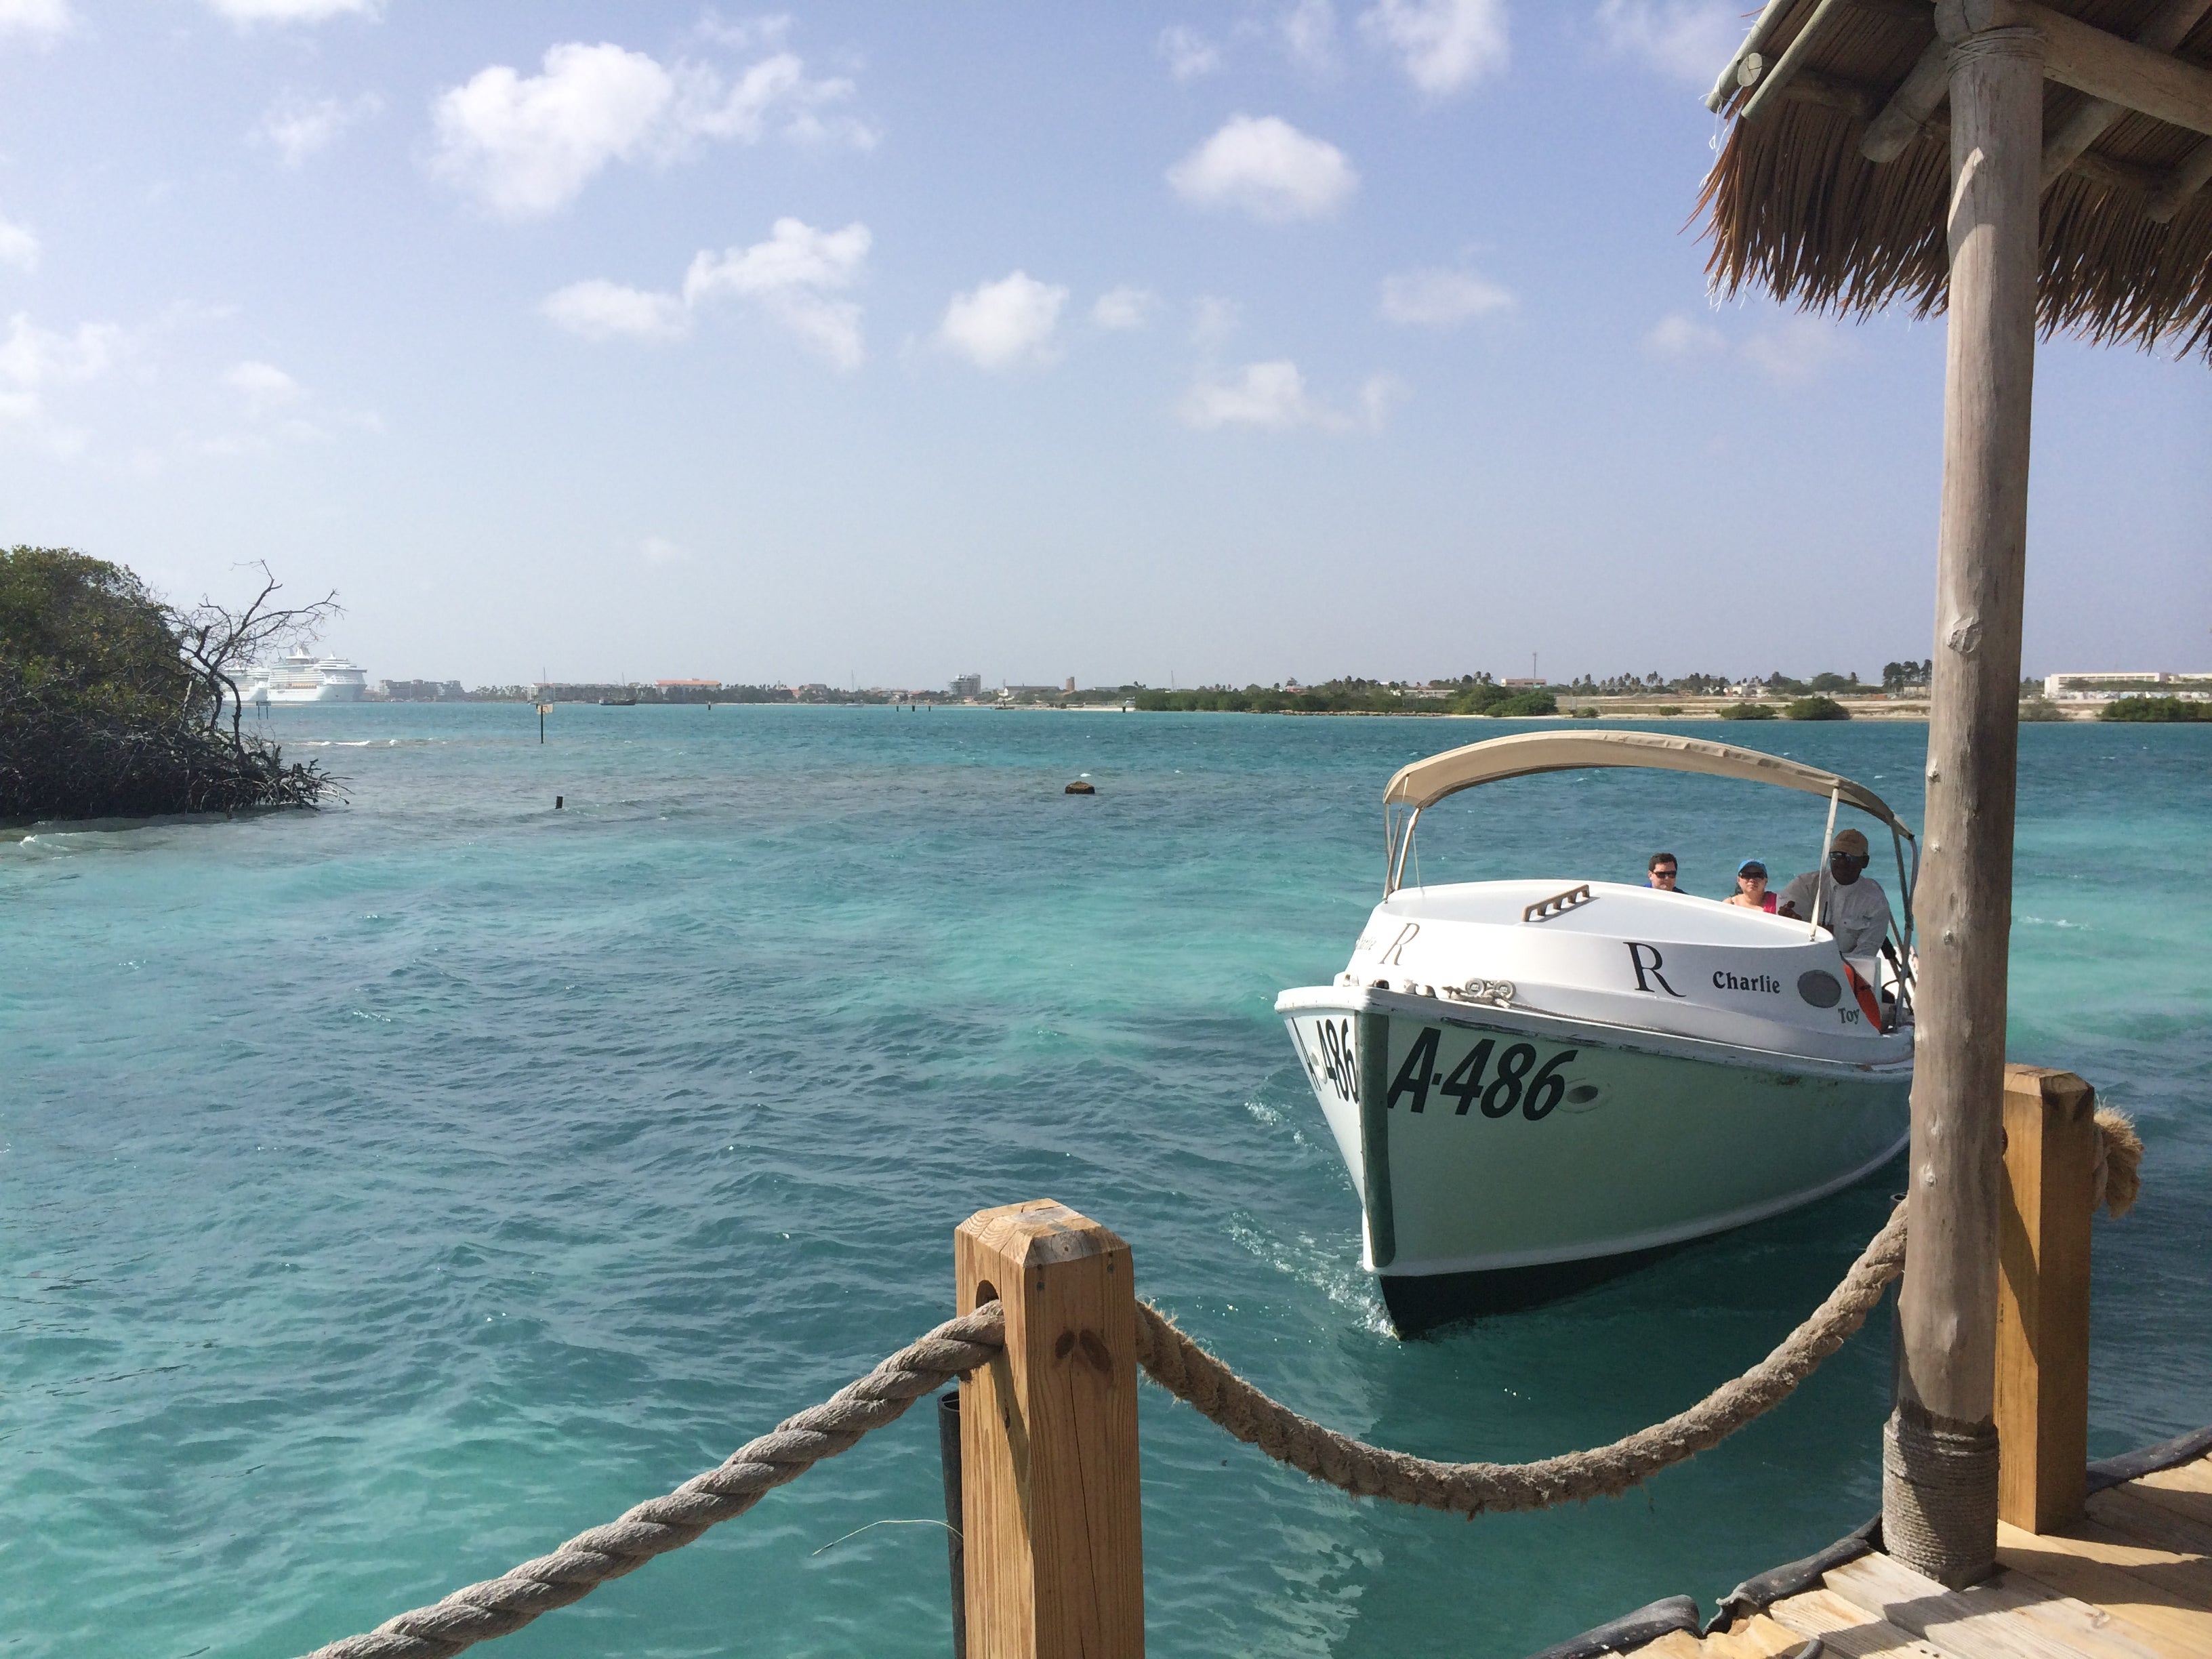 Private Island Renaissance Boat Aruba by Karma for a Cure Blog